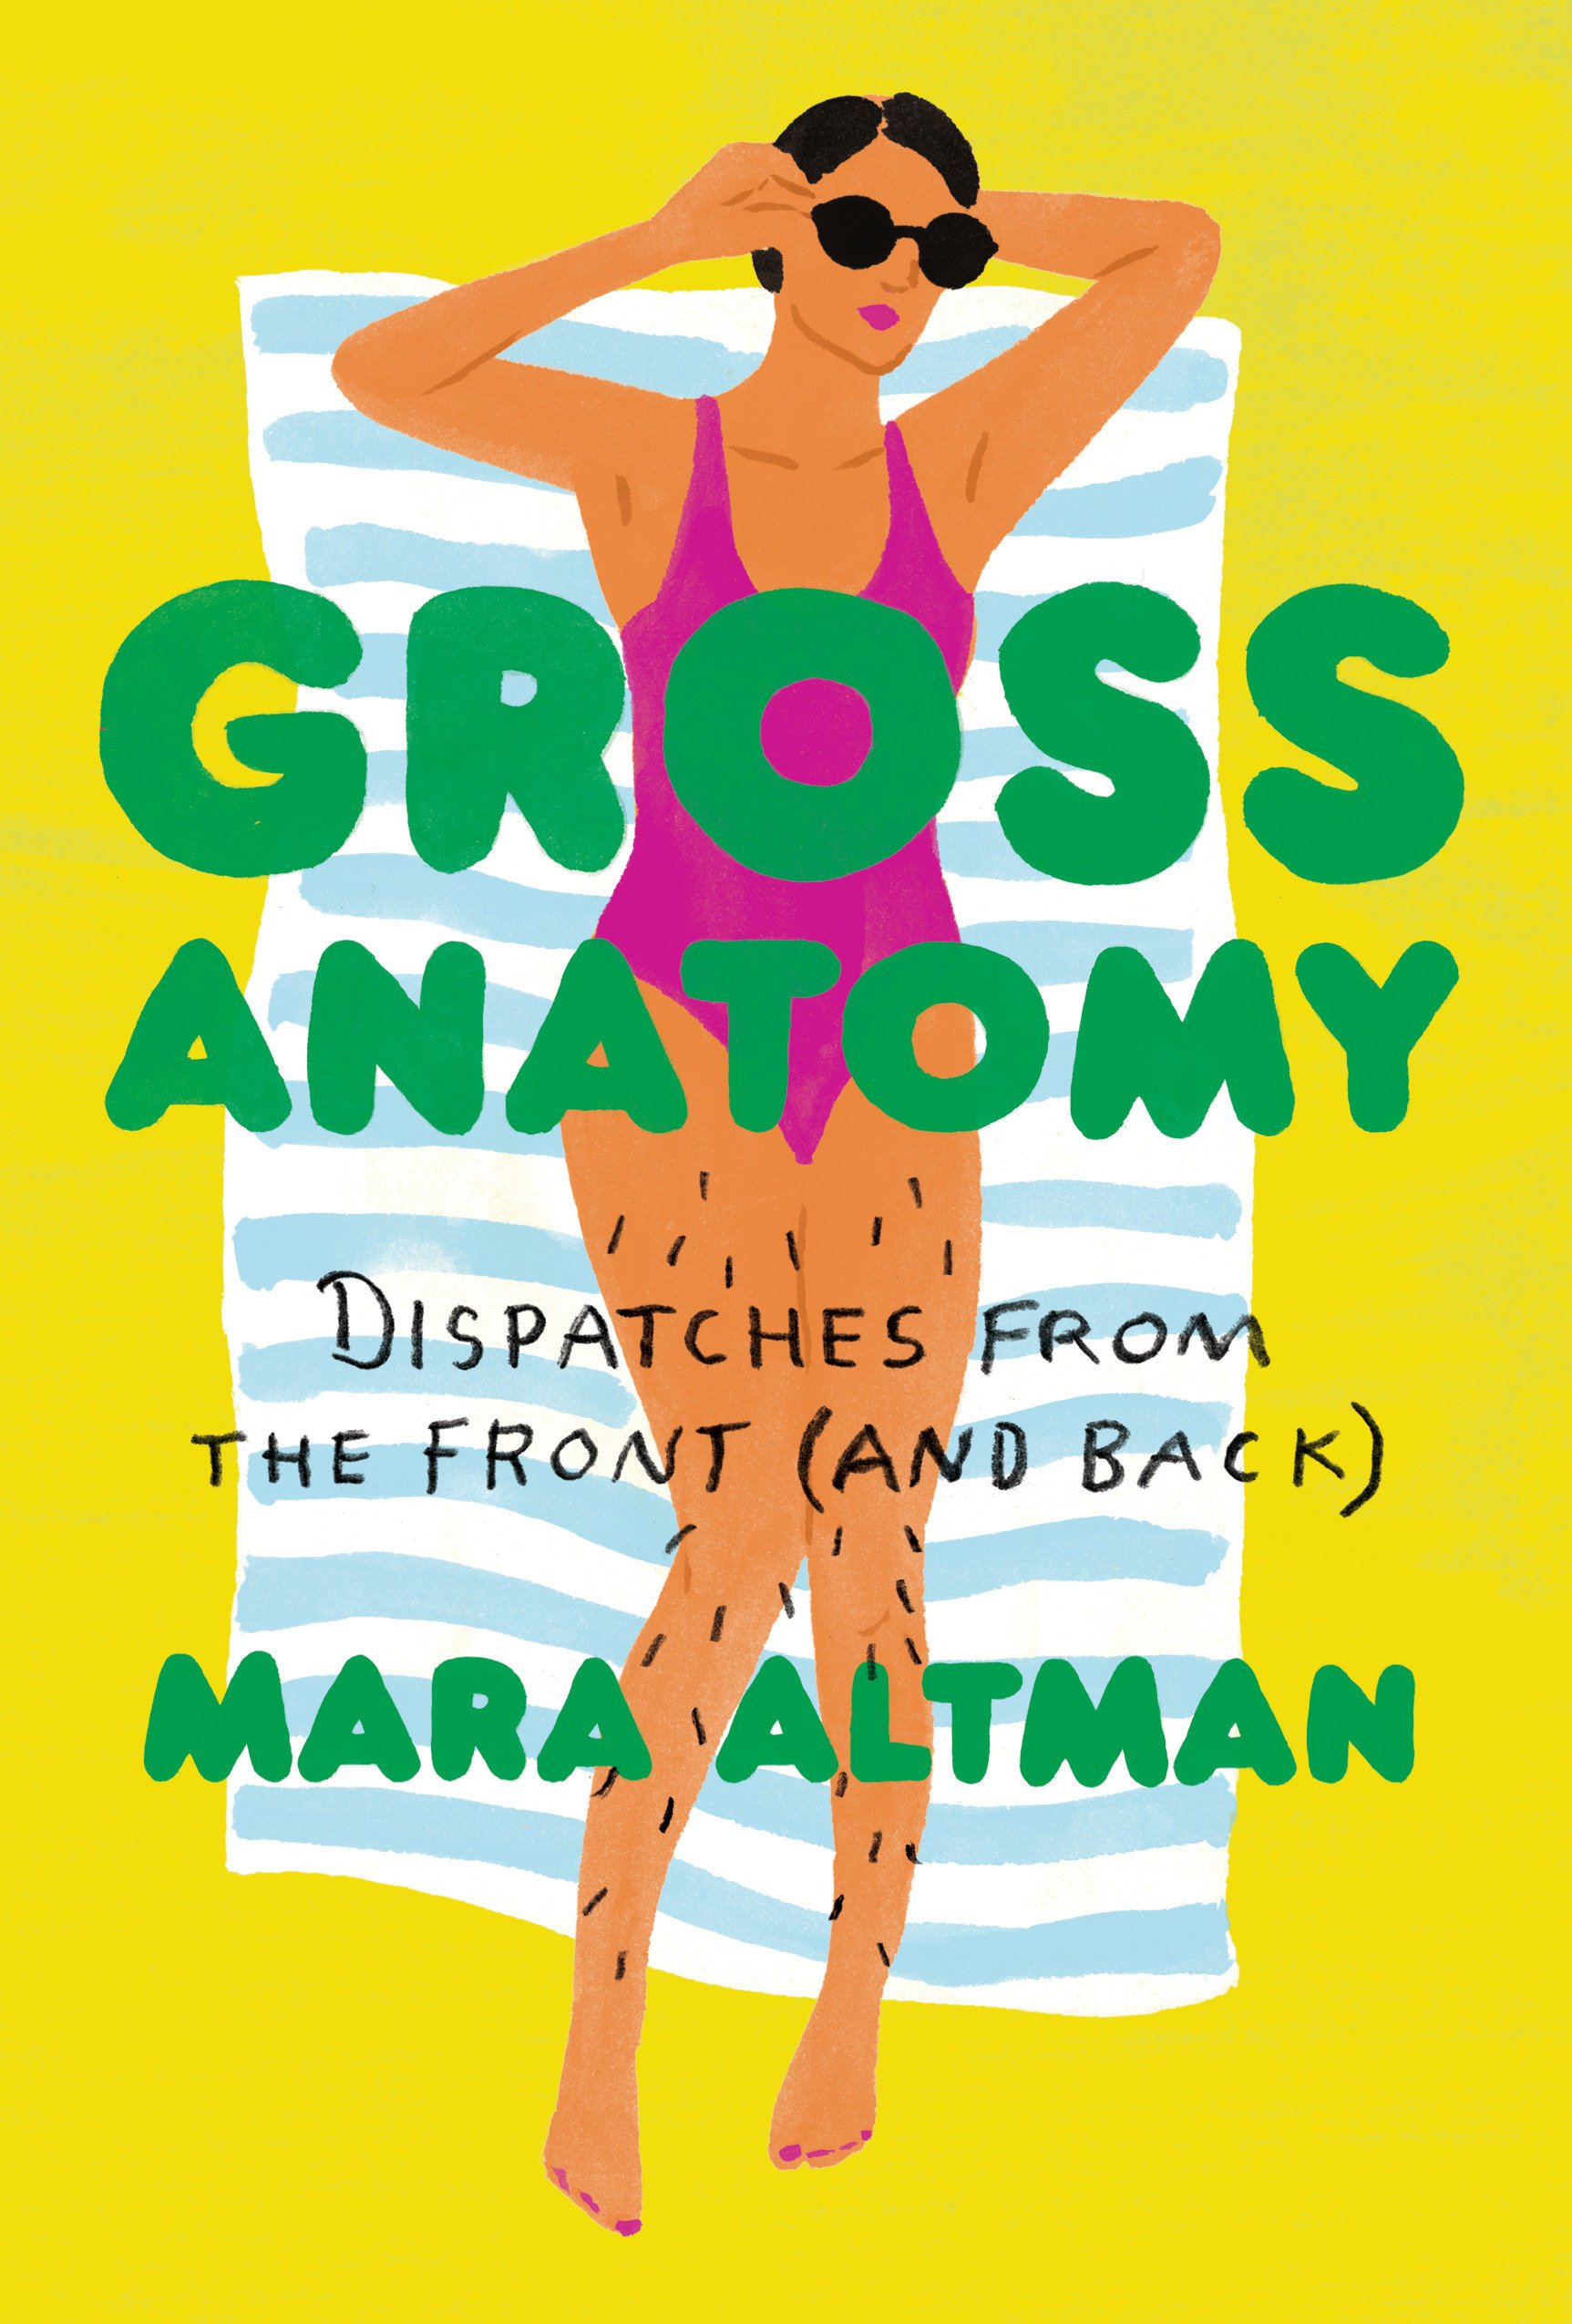 Gross Anatomy: Dispatches from the Front